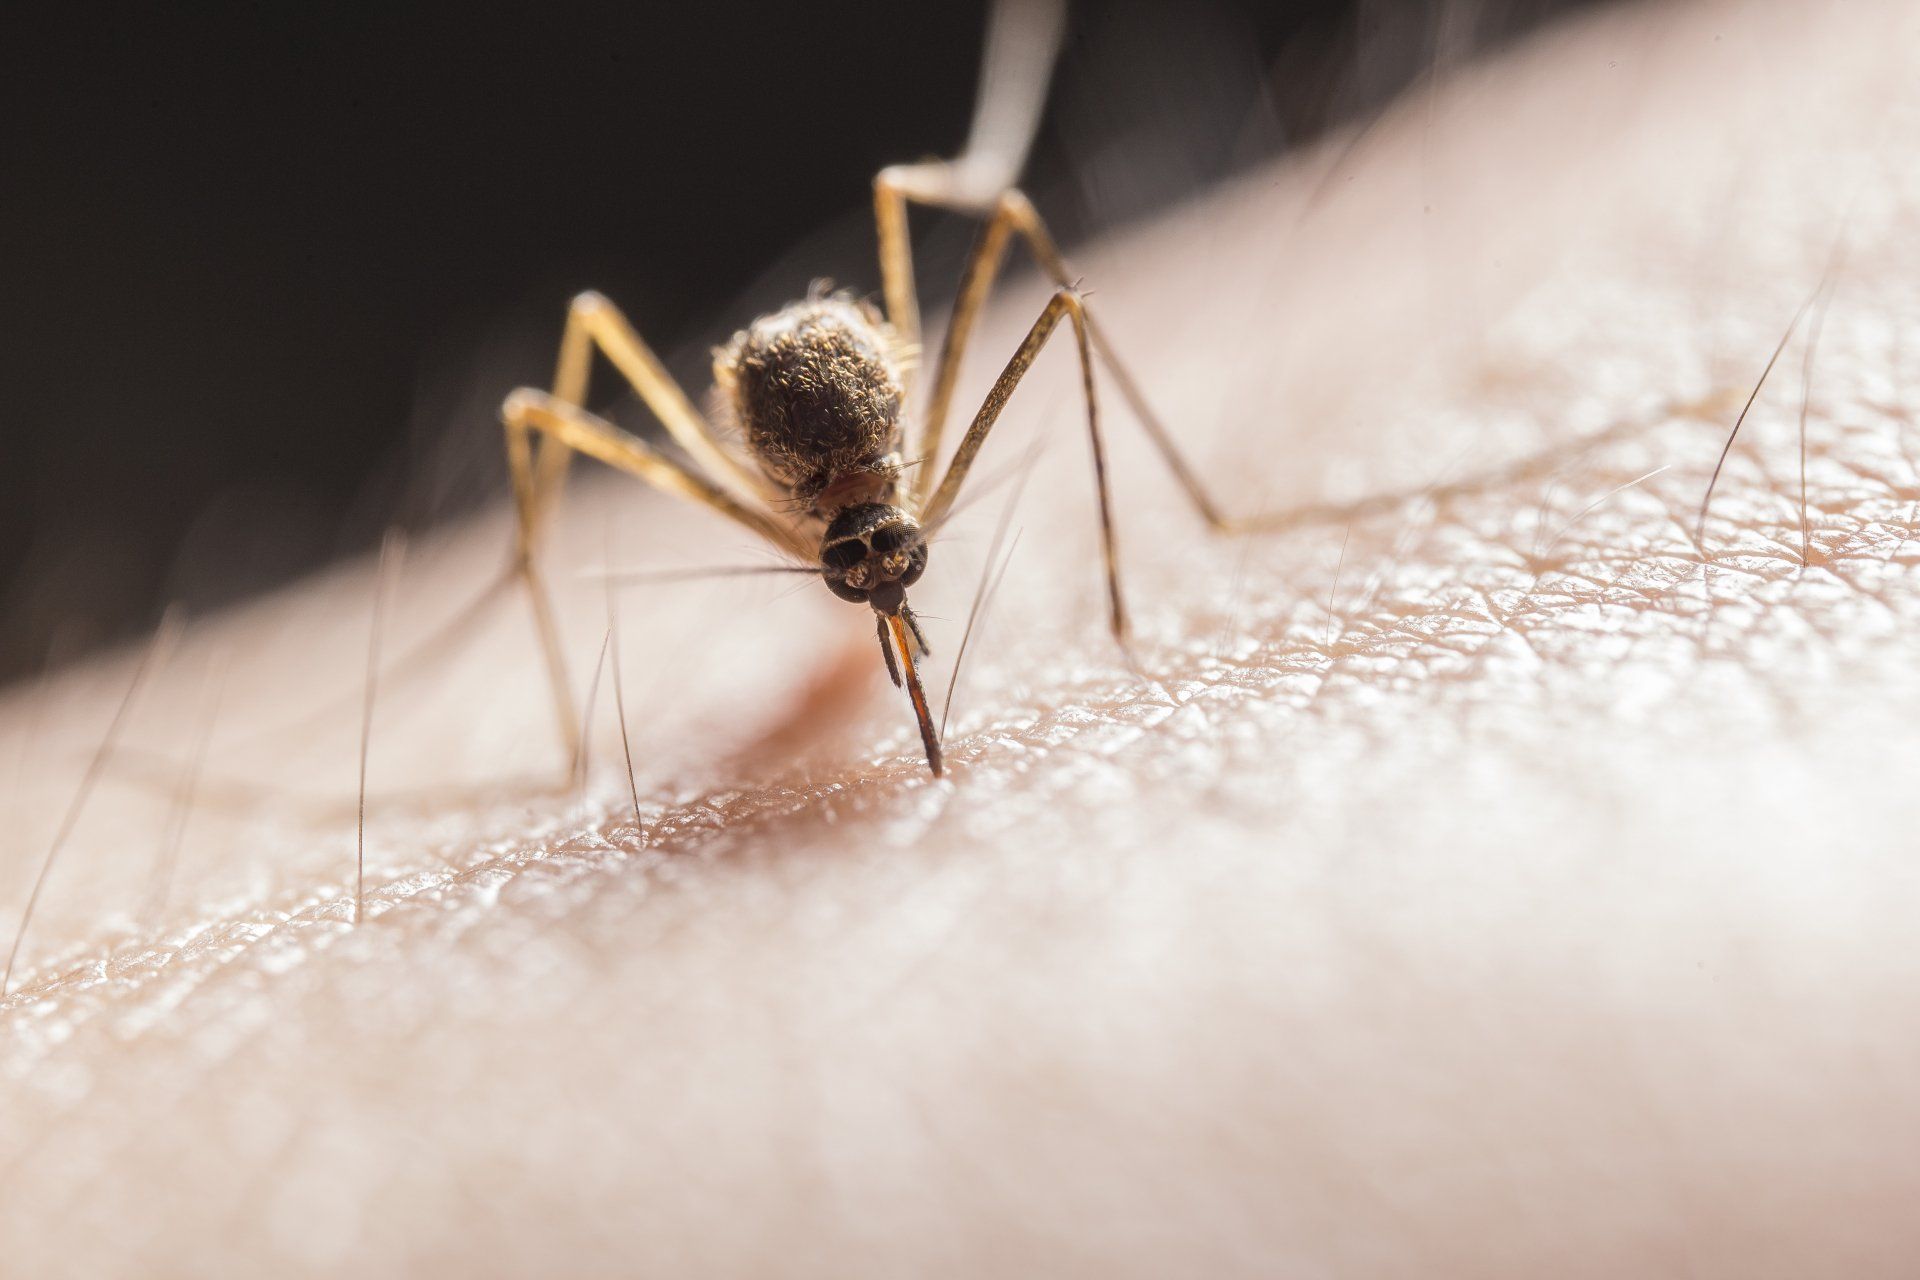 A close up of a mosquito biting a person 's arm.